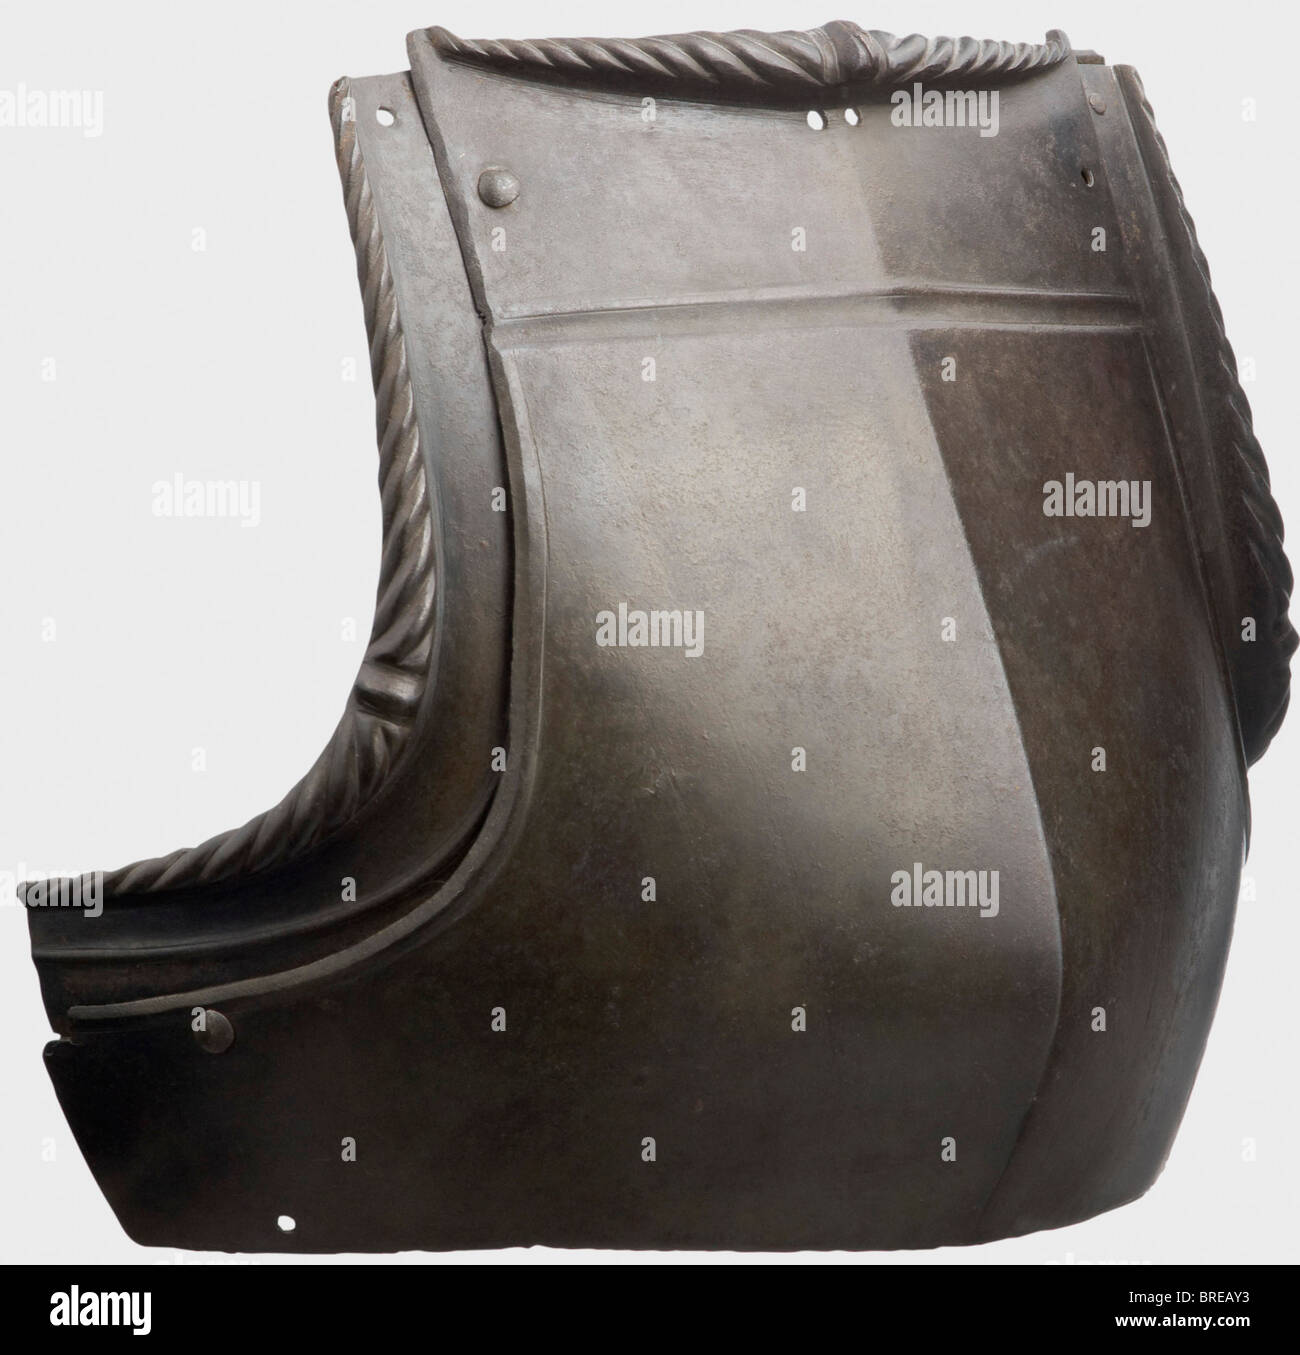 A German breastplate for a suit of armour, circa 1500 Ridged, blackened breastplate with a prominent central projection and sliding gussets, the edges heavily flanged and lavishly roped. Of the two shoulder clasps and rivets at the gussets in each case one preserved. Height 27 cm. historic, historical, 16th century, defensive arms, weapons, arms, weapon, arm, fighting device, object, objects, stills, clipping, clippings, cut out, cut-out, cut-outs, utensil, piece of equipment, utensils, plating, armour-plating, armour, armor, reactive armour, armour suit, armor, Stock Photo